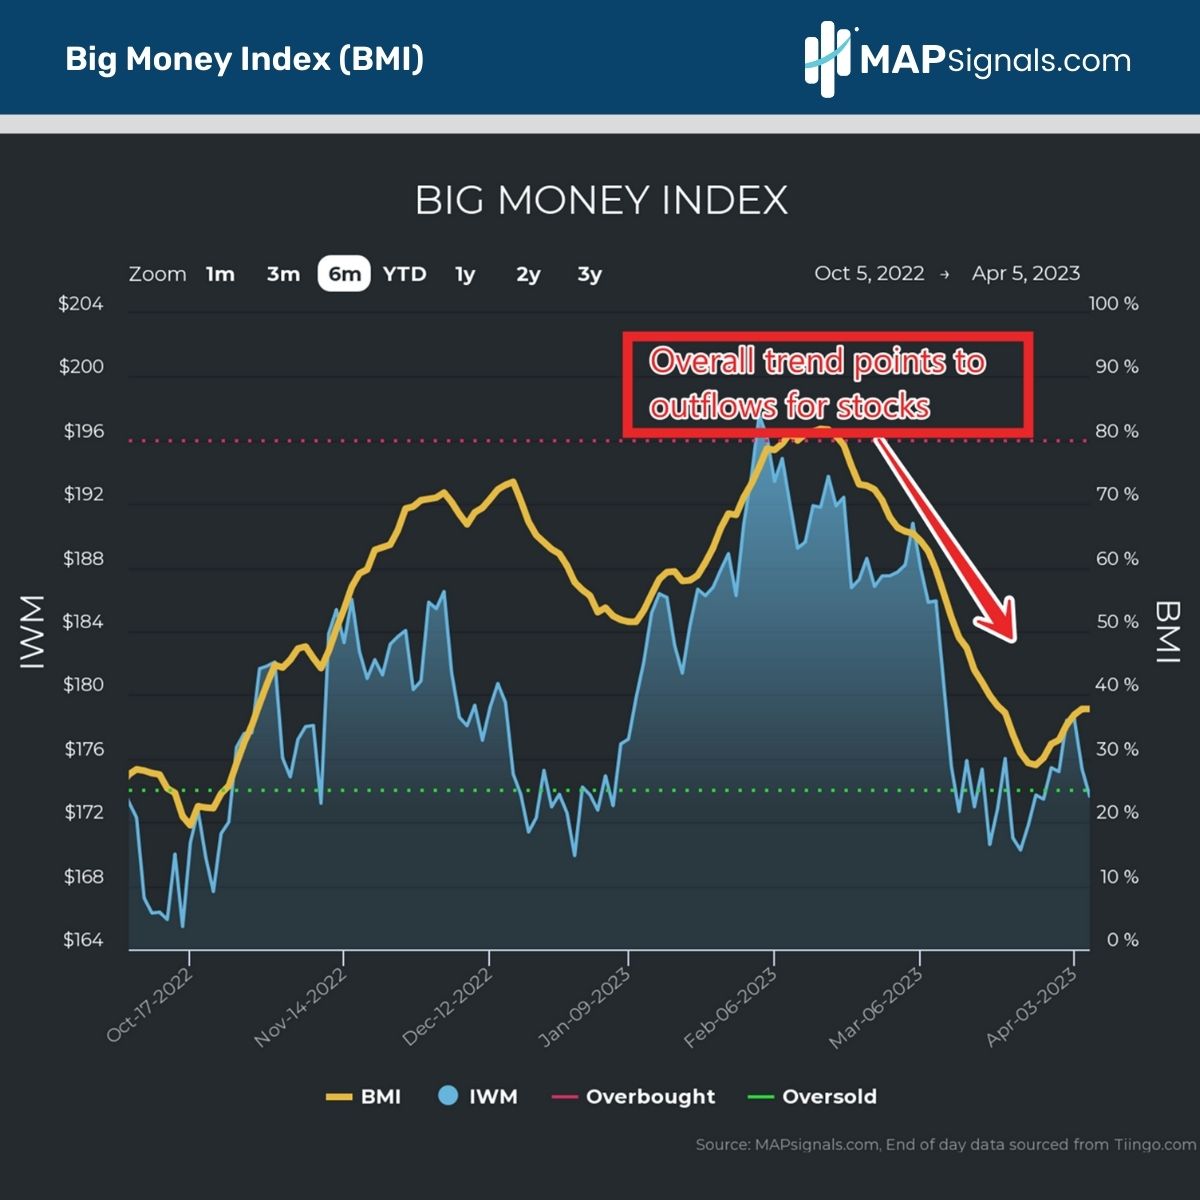 Overall trend points to outflow in stocks | Big Money Index (BMI)